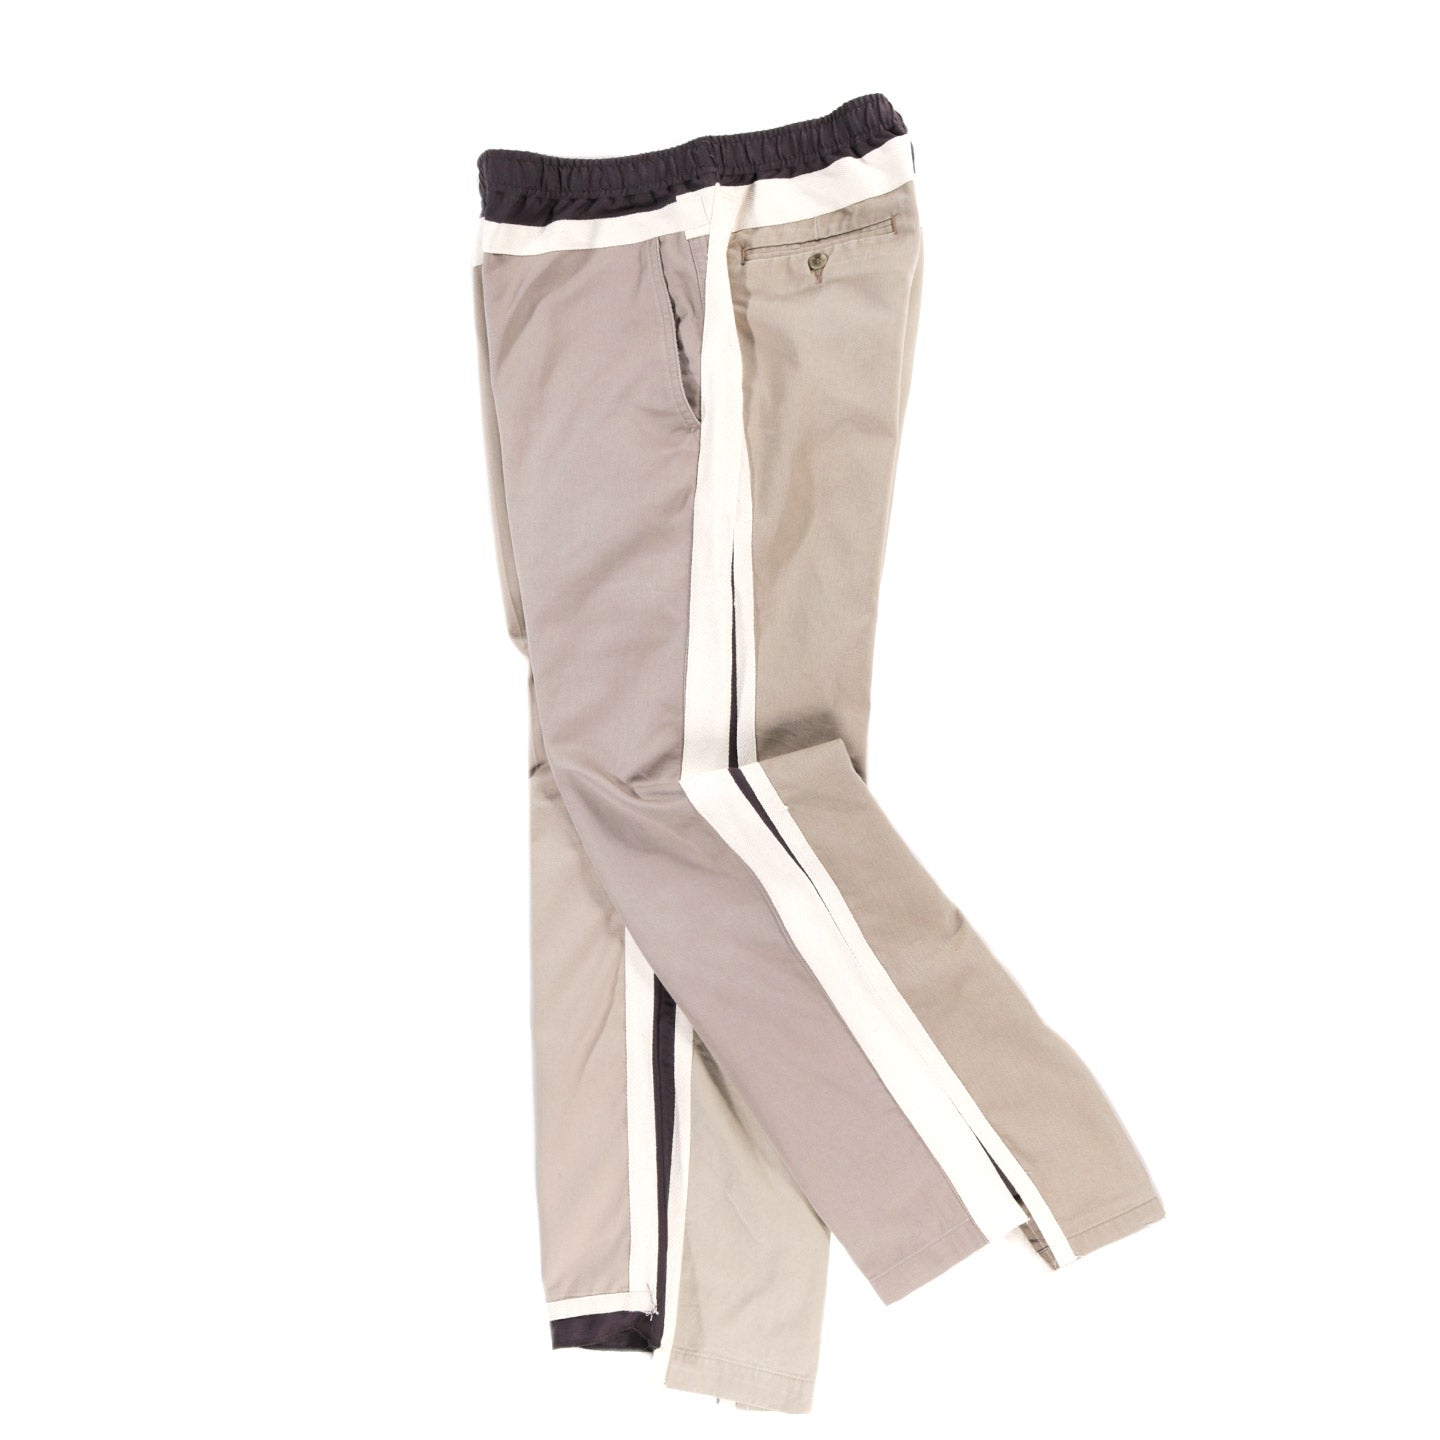 REBUILD BY NEEDLES CHINO COVERED PANT CHARCOAL - S (A)